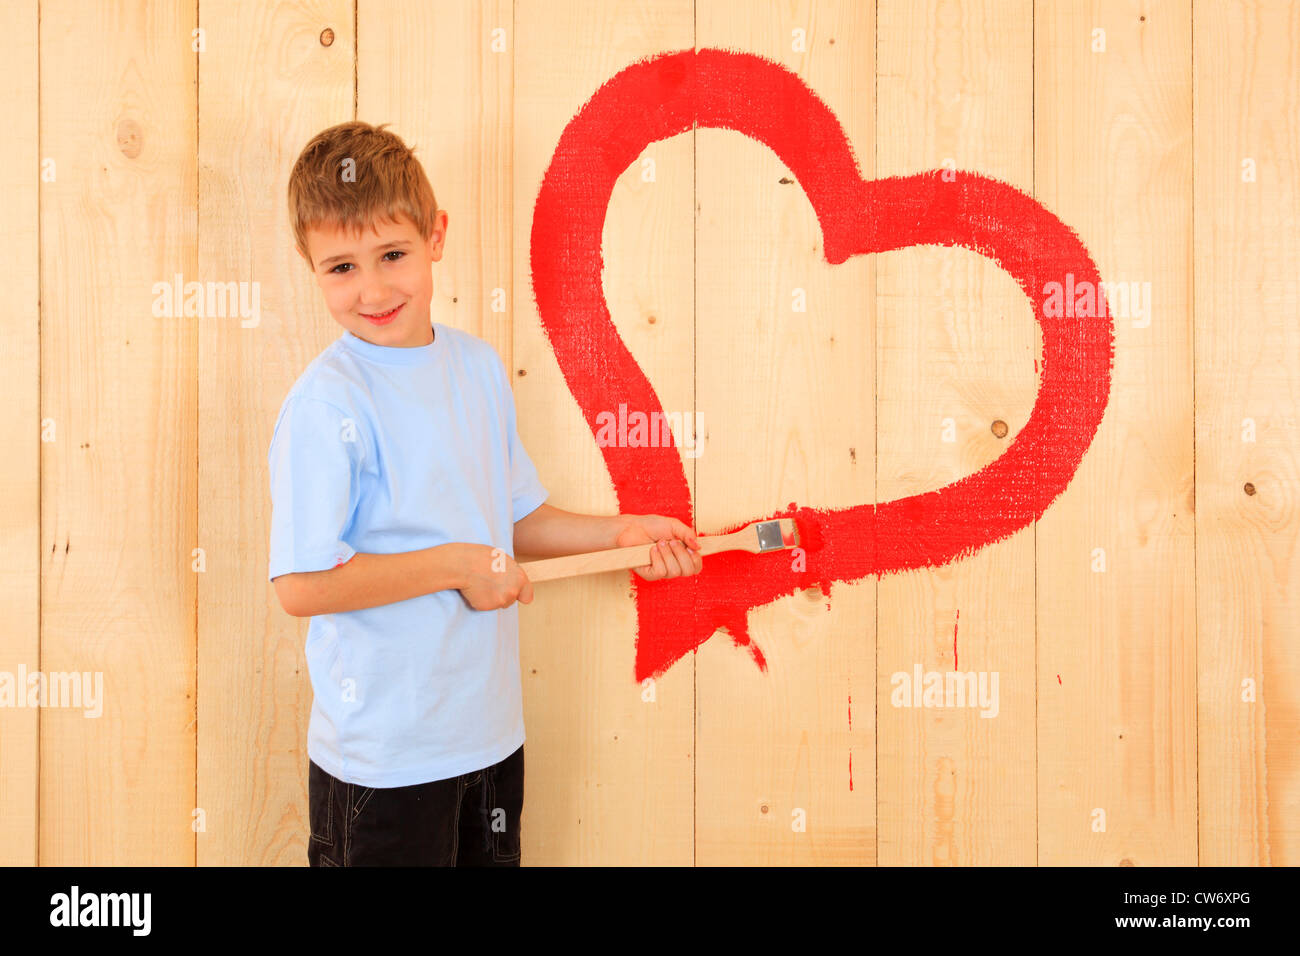 boy painting a heart onto a wooden wall with red paint Stock Photo